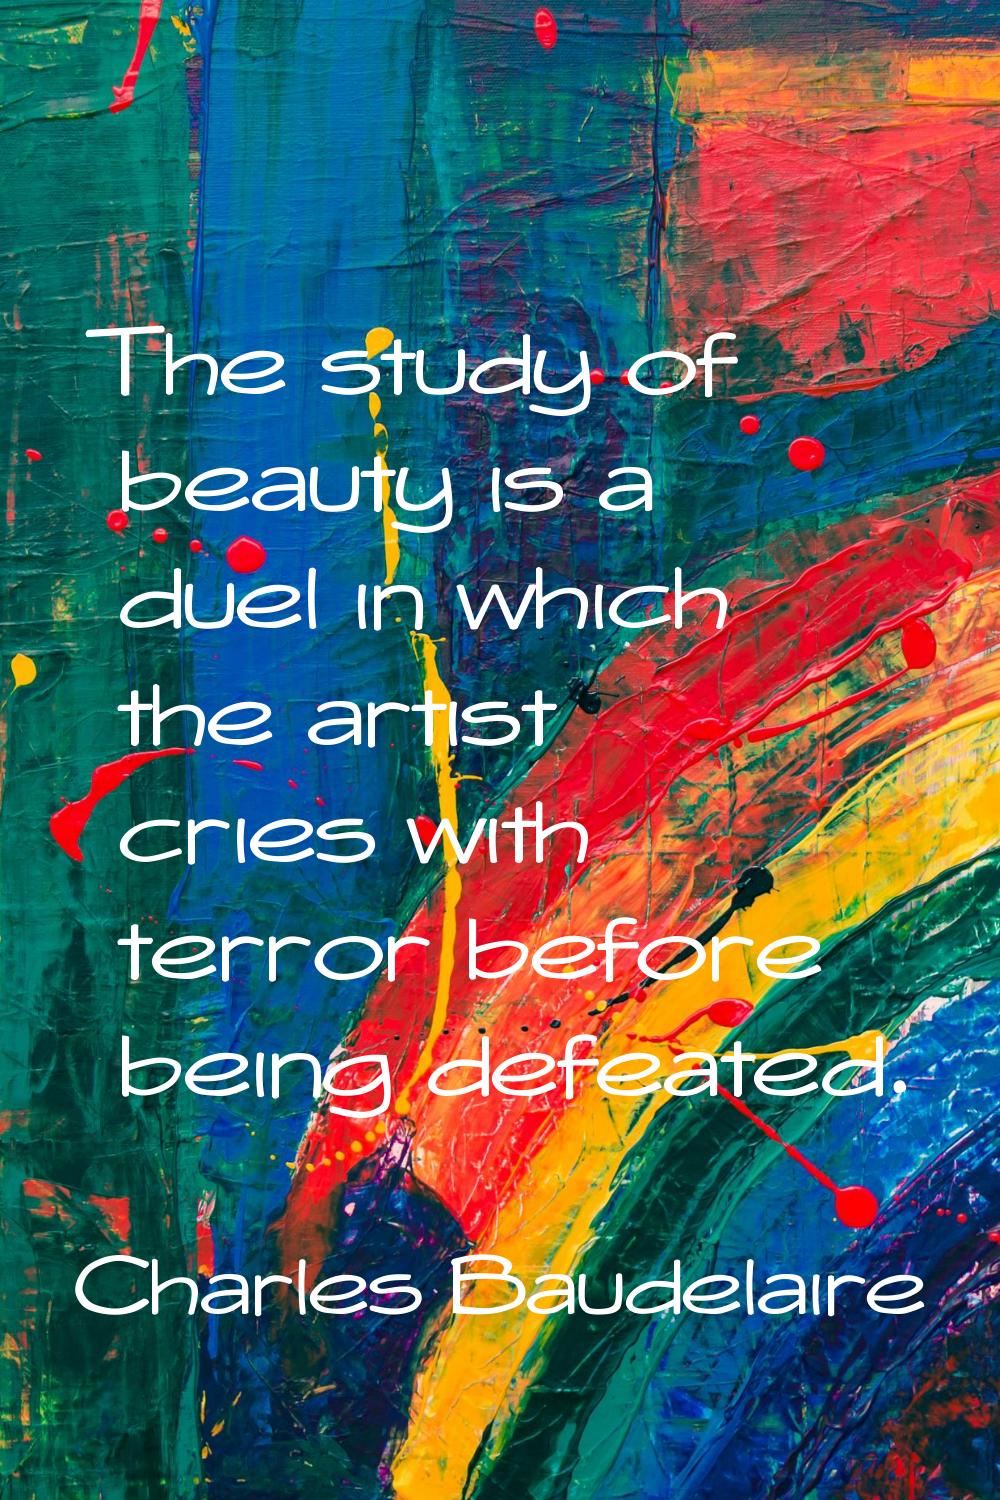 The study of beauty is a duel in which the artist cries with terror before being defeated.